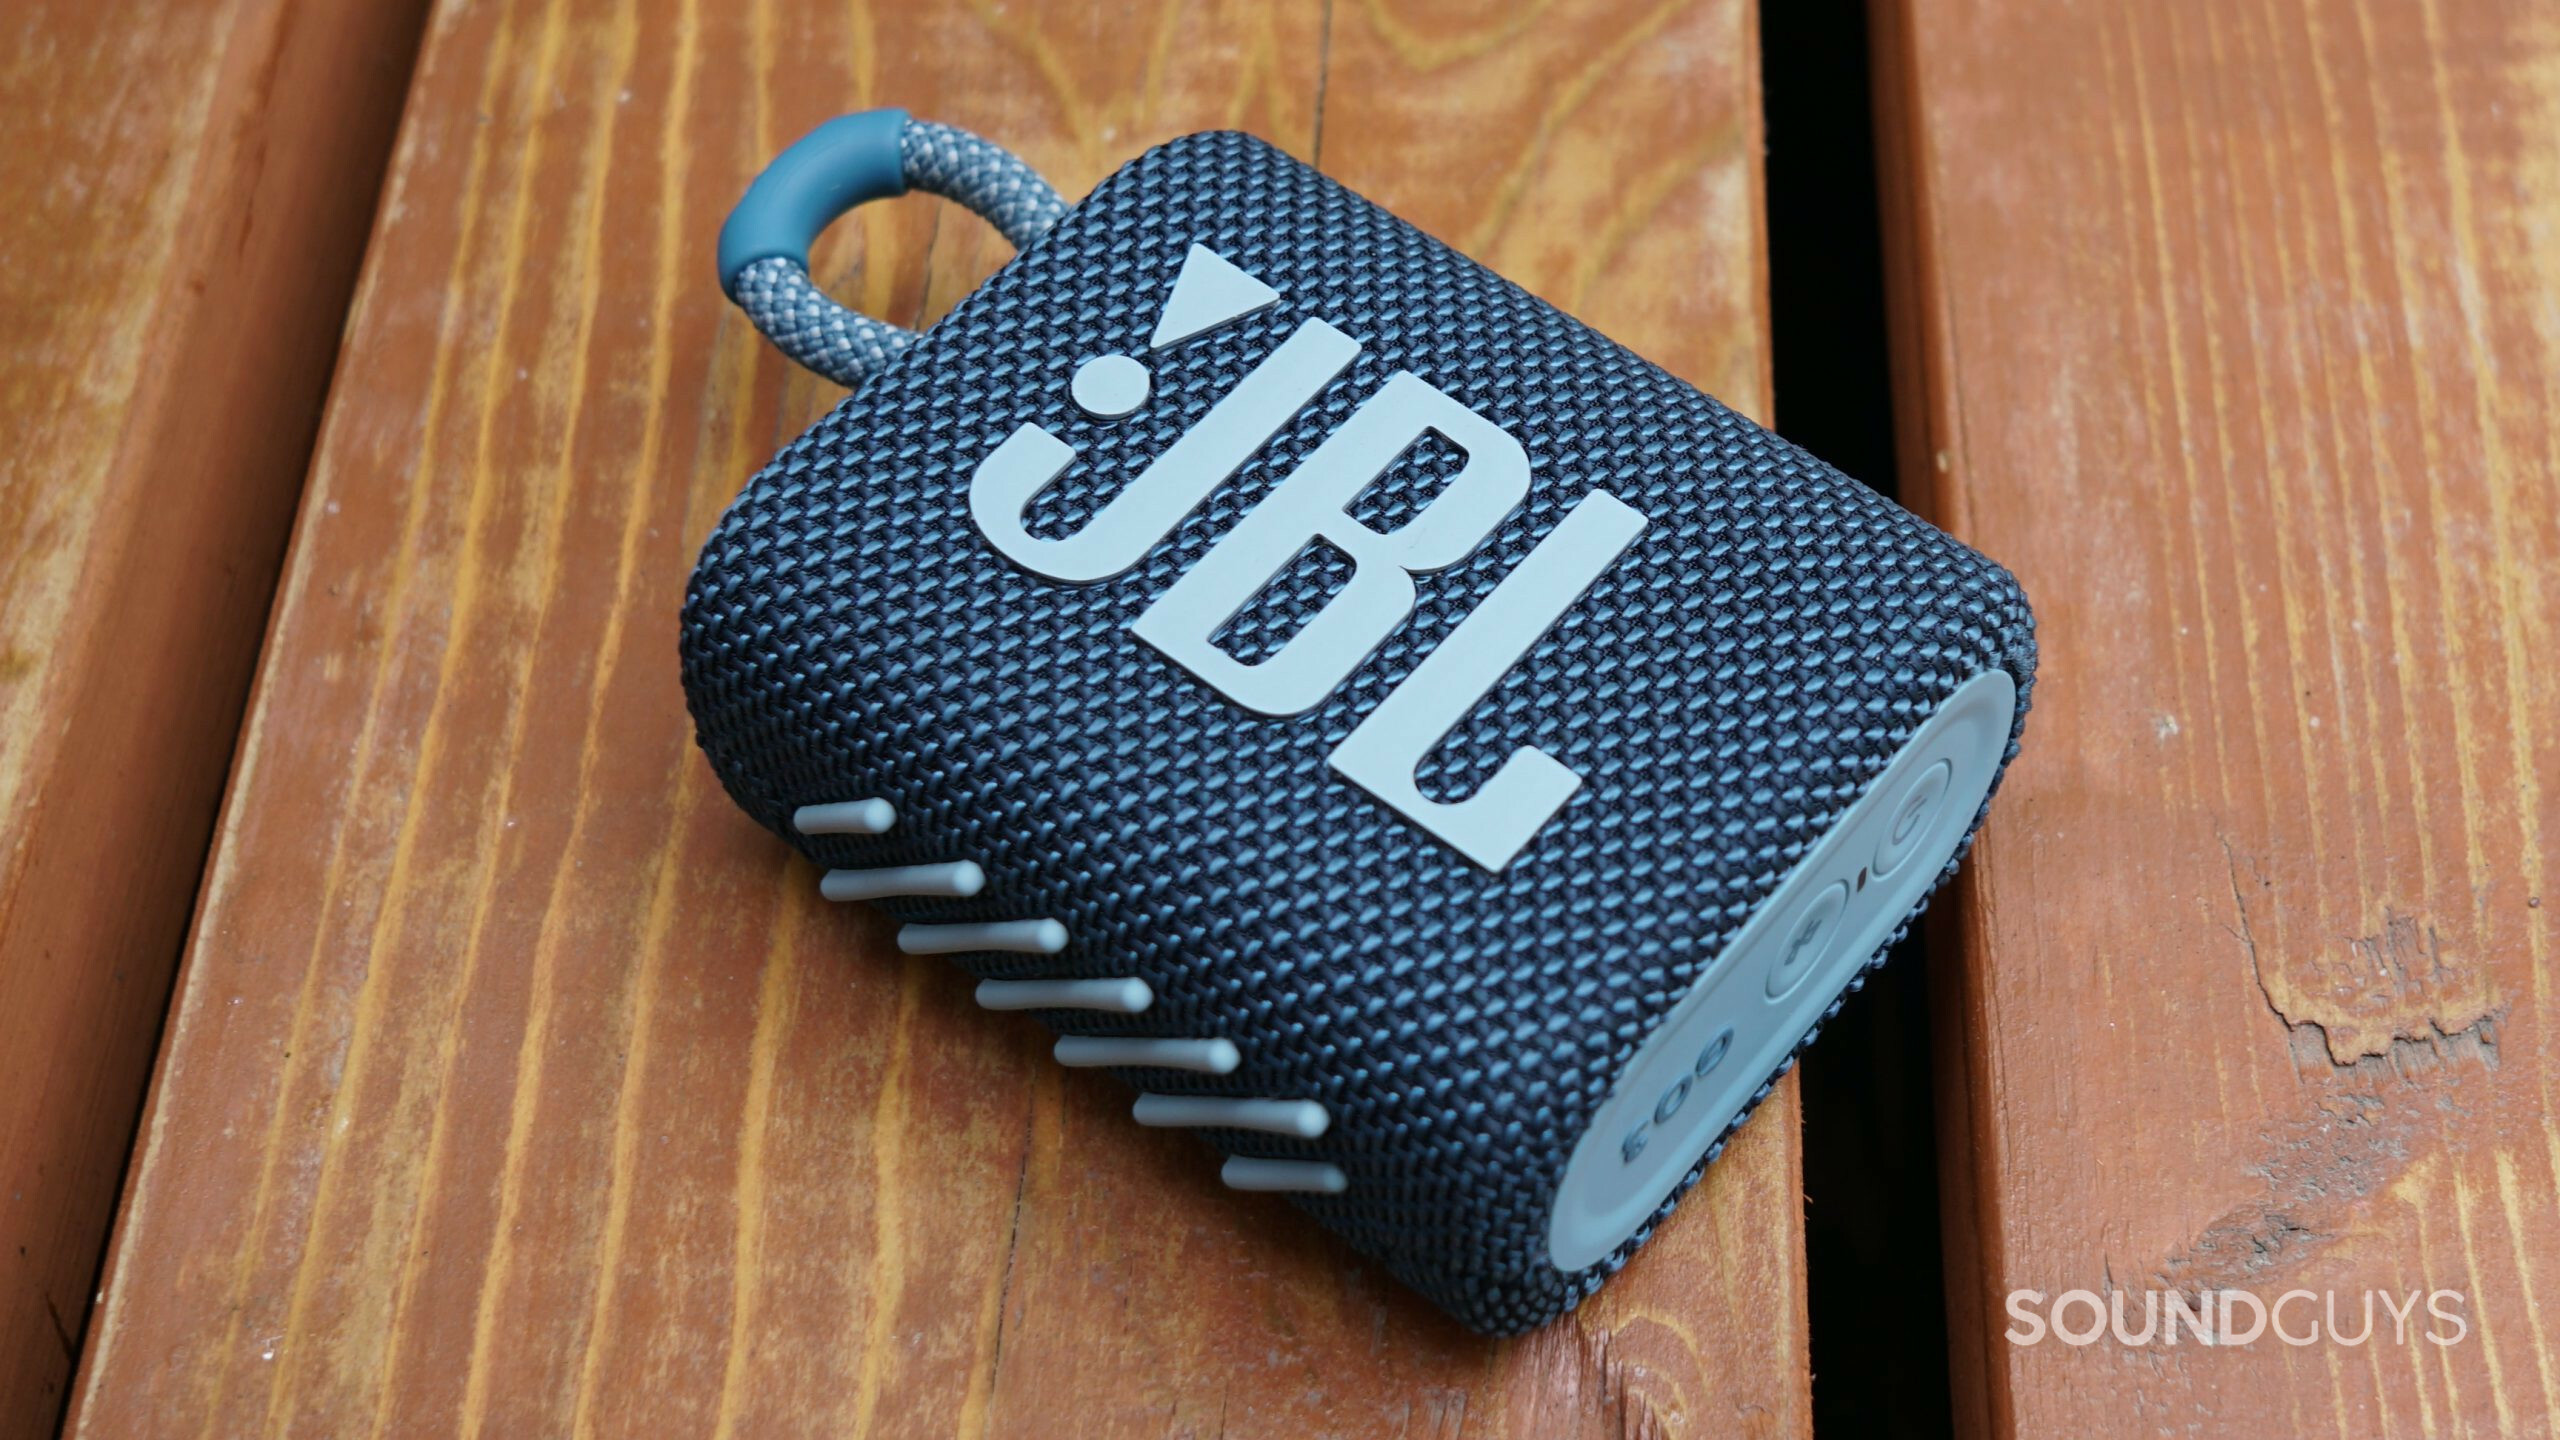 The JBL Go 3 lays on a wooden surface.